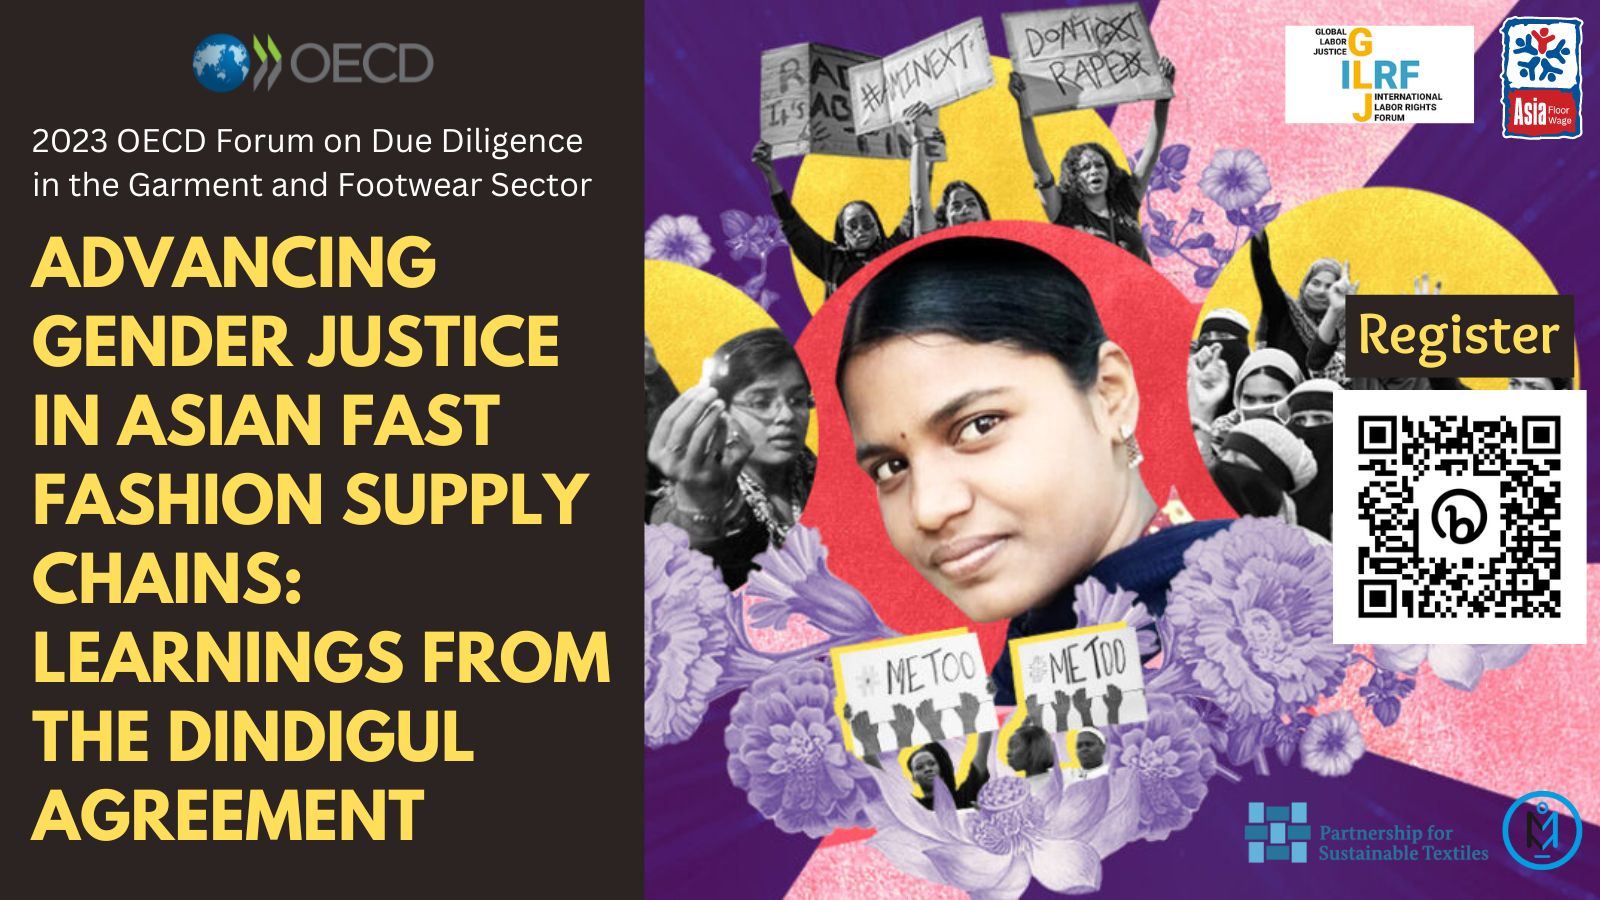 OECD 2023 Side Session | Advancing Gender Justice in Asian Fast Fashion Supply Chains: Learnings from the Dindigul Agreement